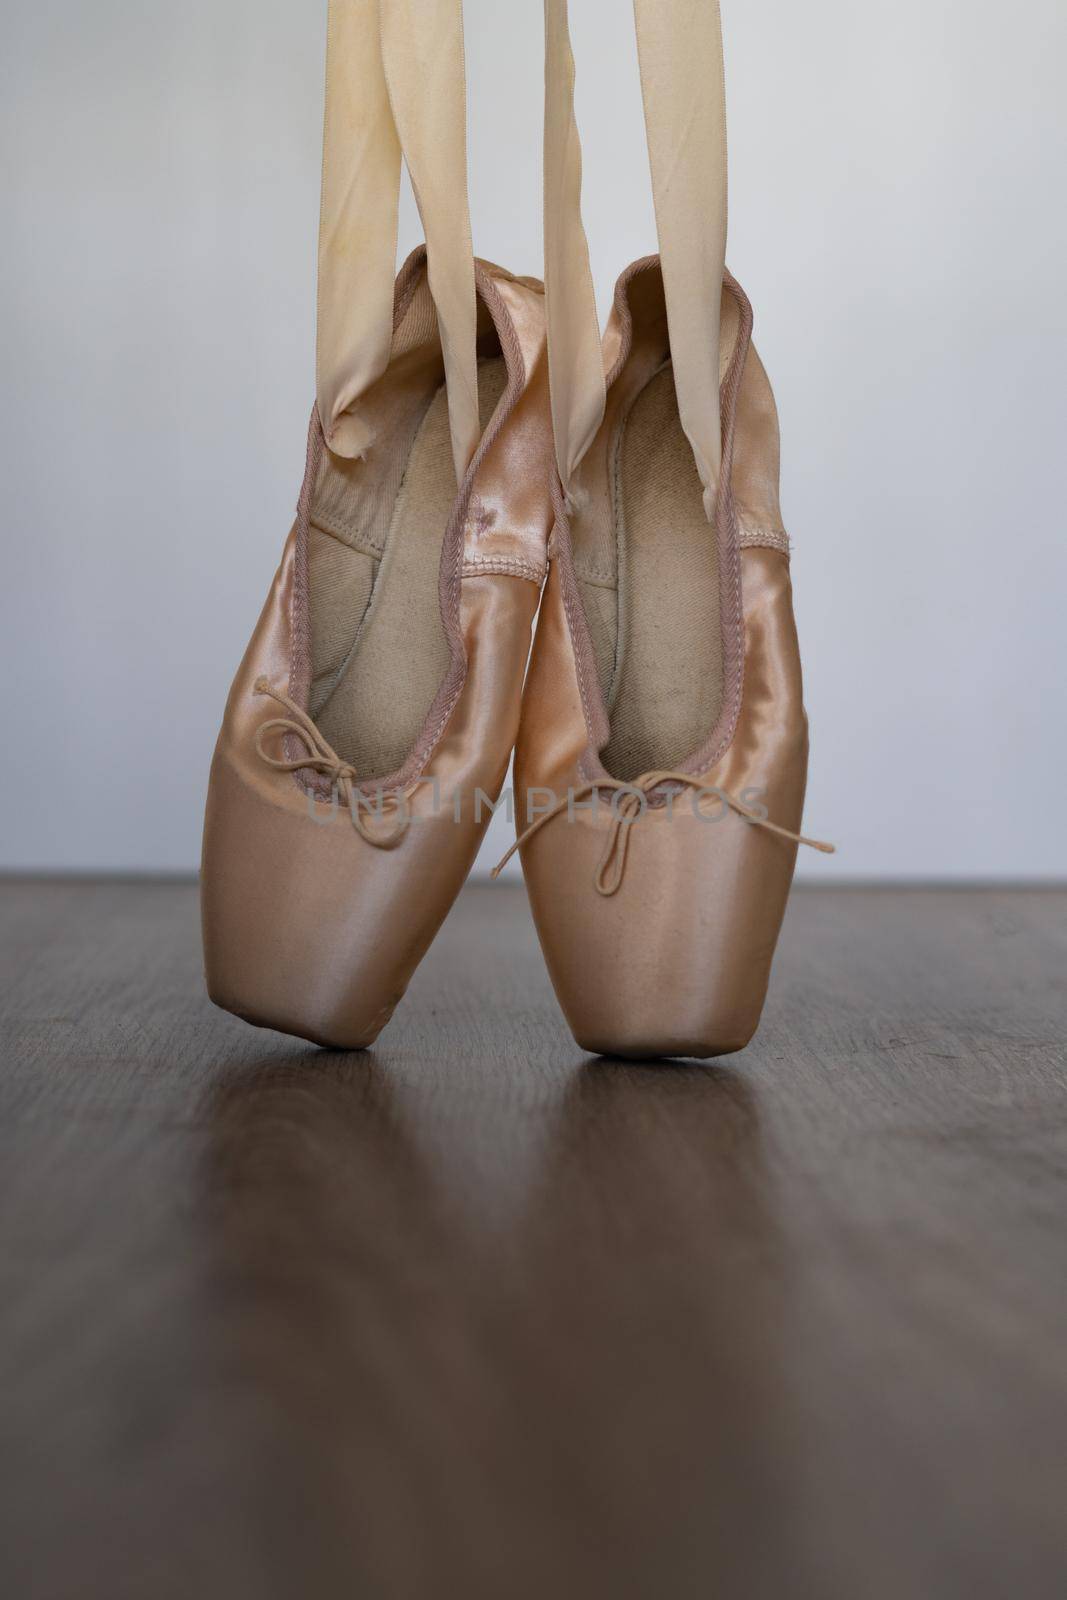 ballet slippers with orange ribbon on a wooden floor and white background